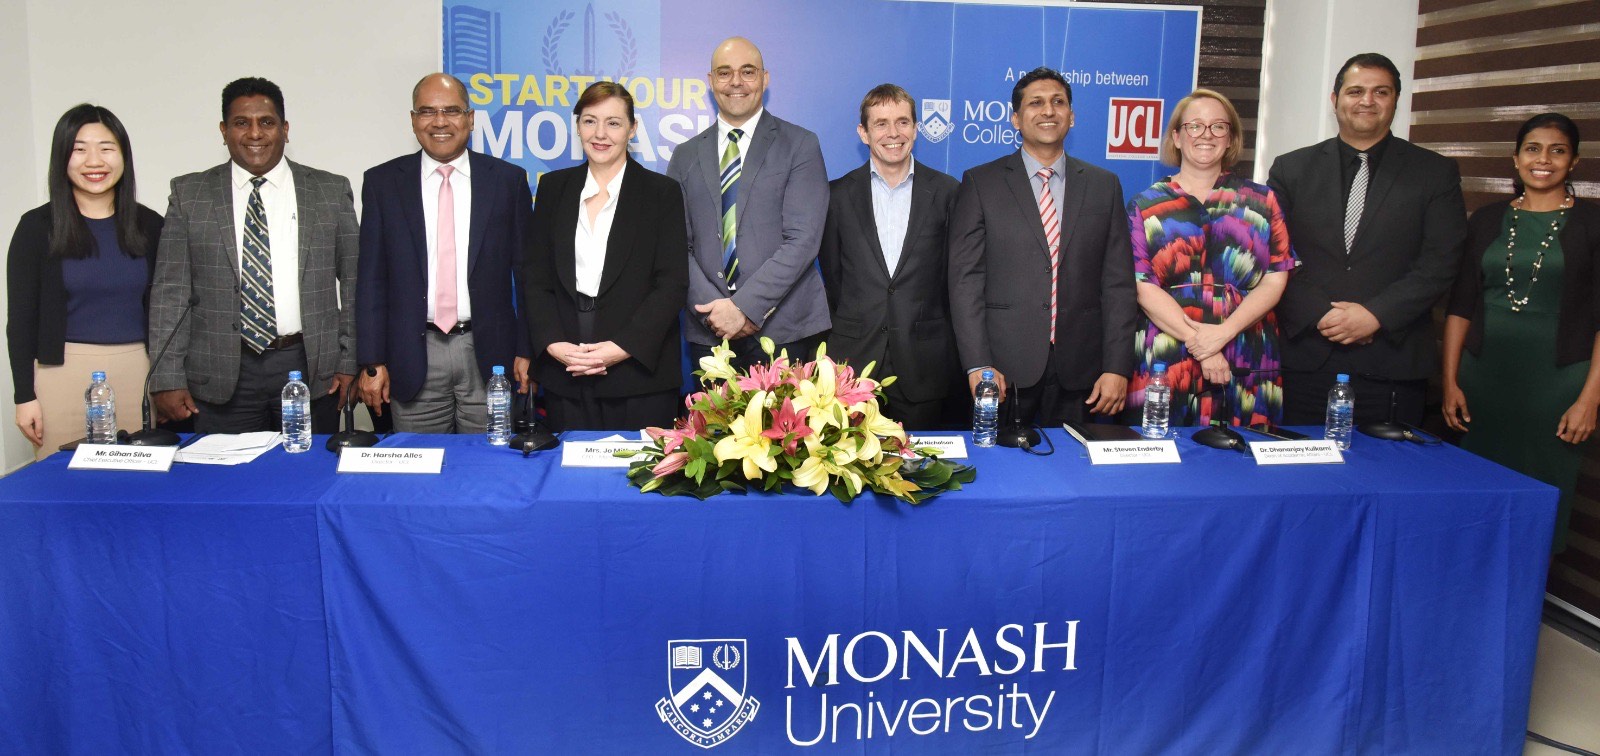 Monash reinforces exclusive partnership with UCL  to secure pathways to the World’s Highest Ranked University from Sri Lanka